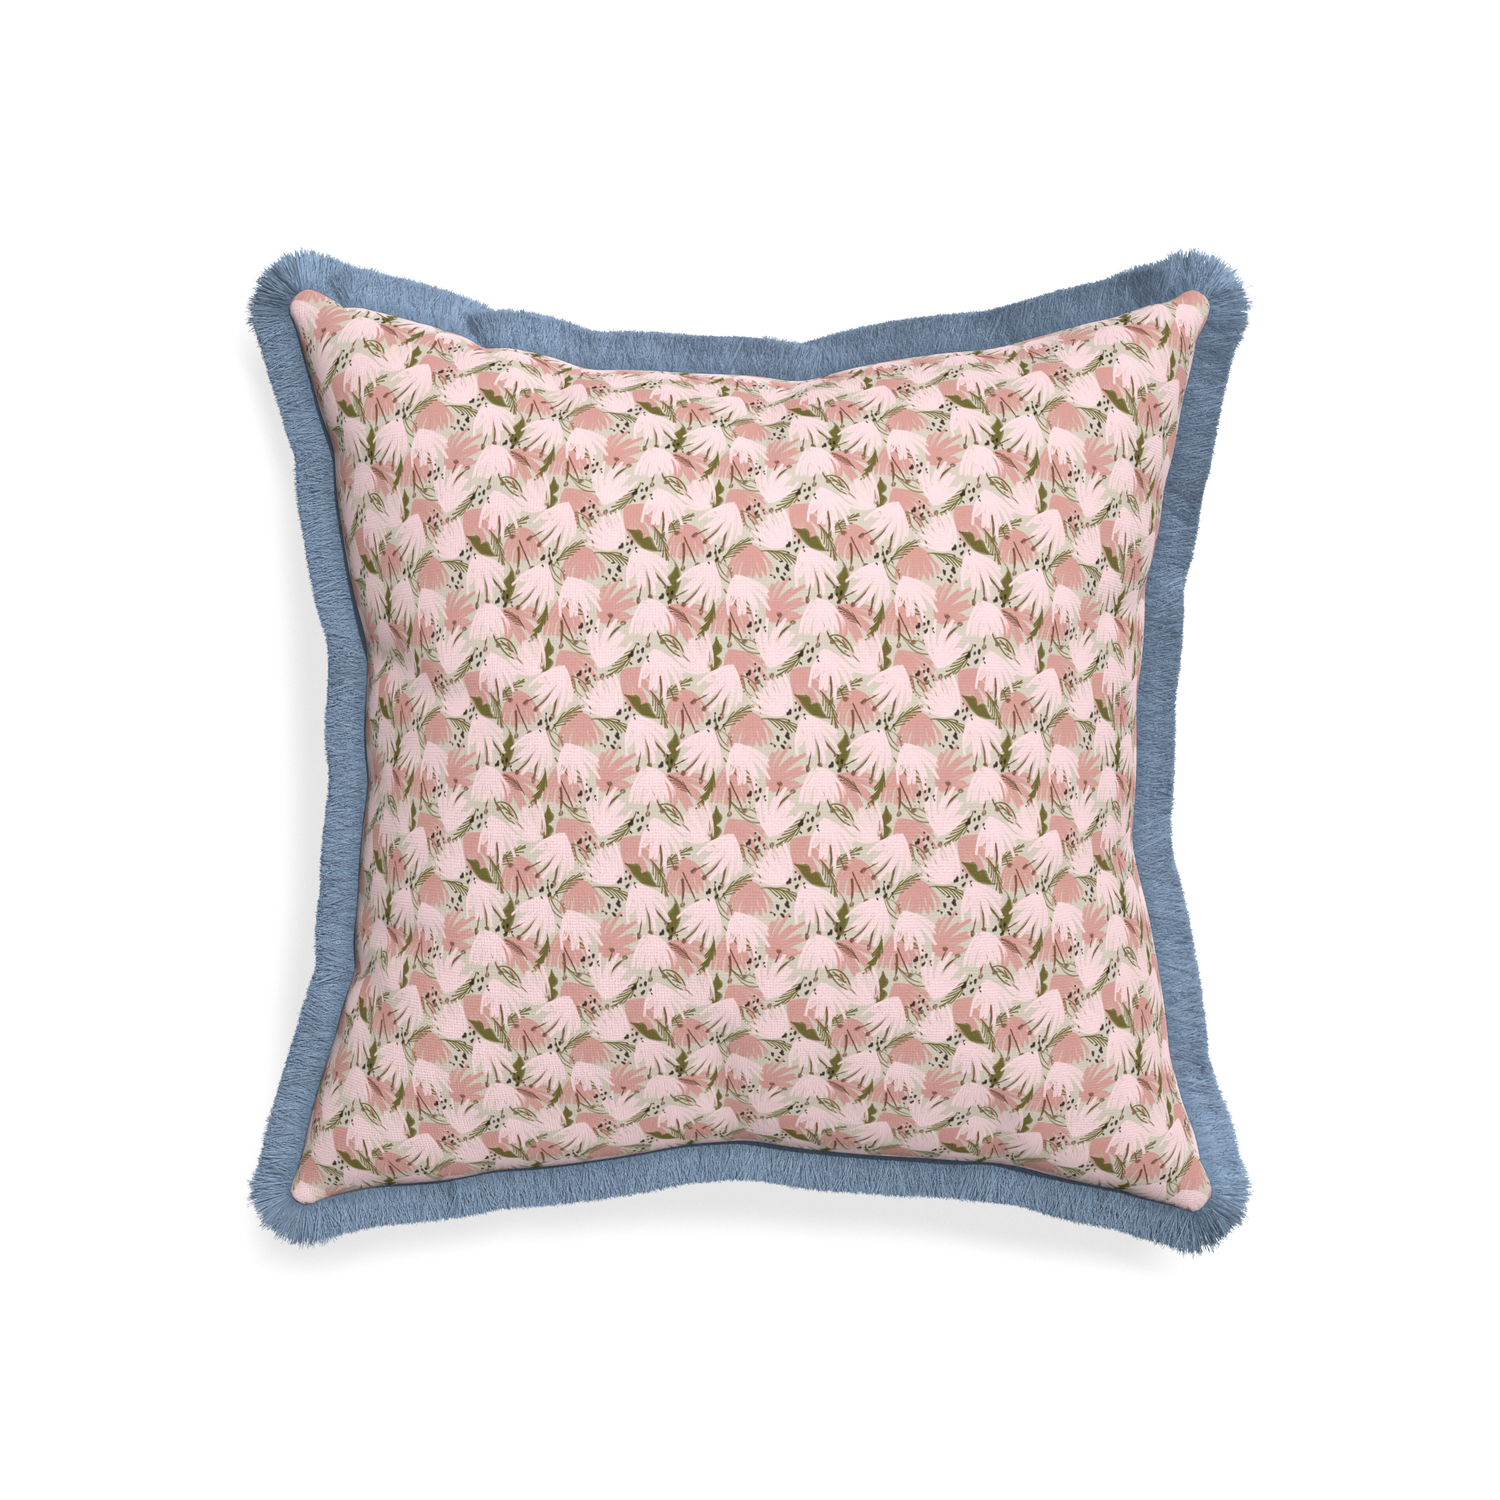 20-square eden pink custom pink floralpillow with sky fringe on white background